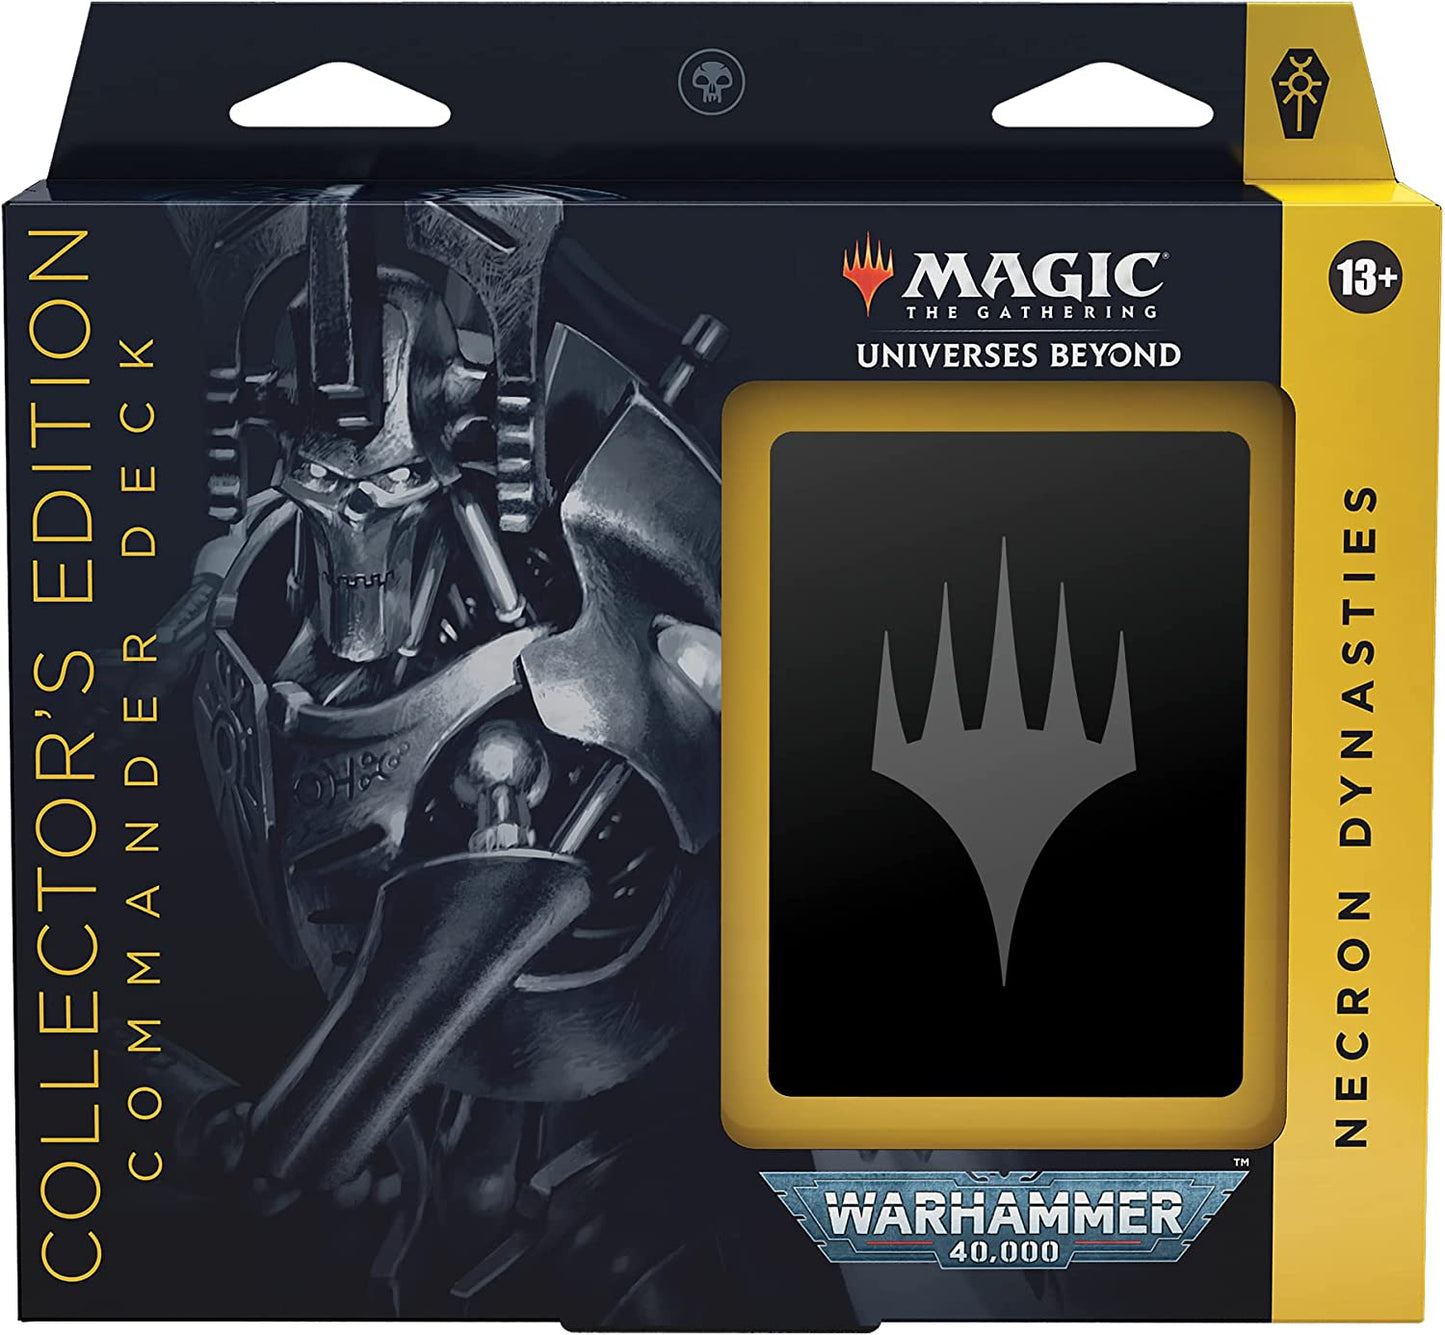 Magic: The Gathering Commander Deck - Universes Beyond: Warhammer 40,000 (Foil Collector's Edition) - Necron Dynasties